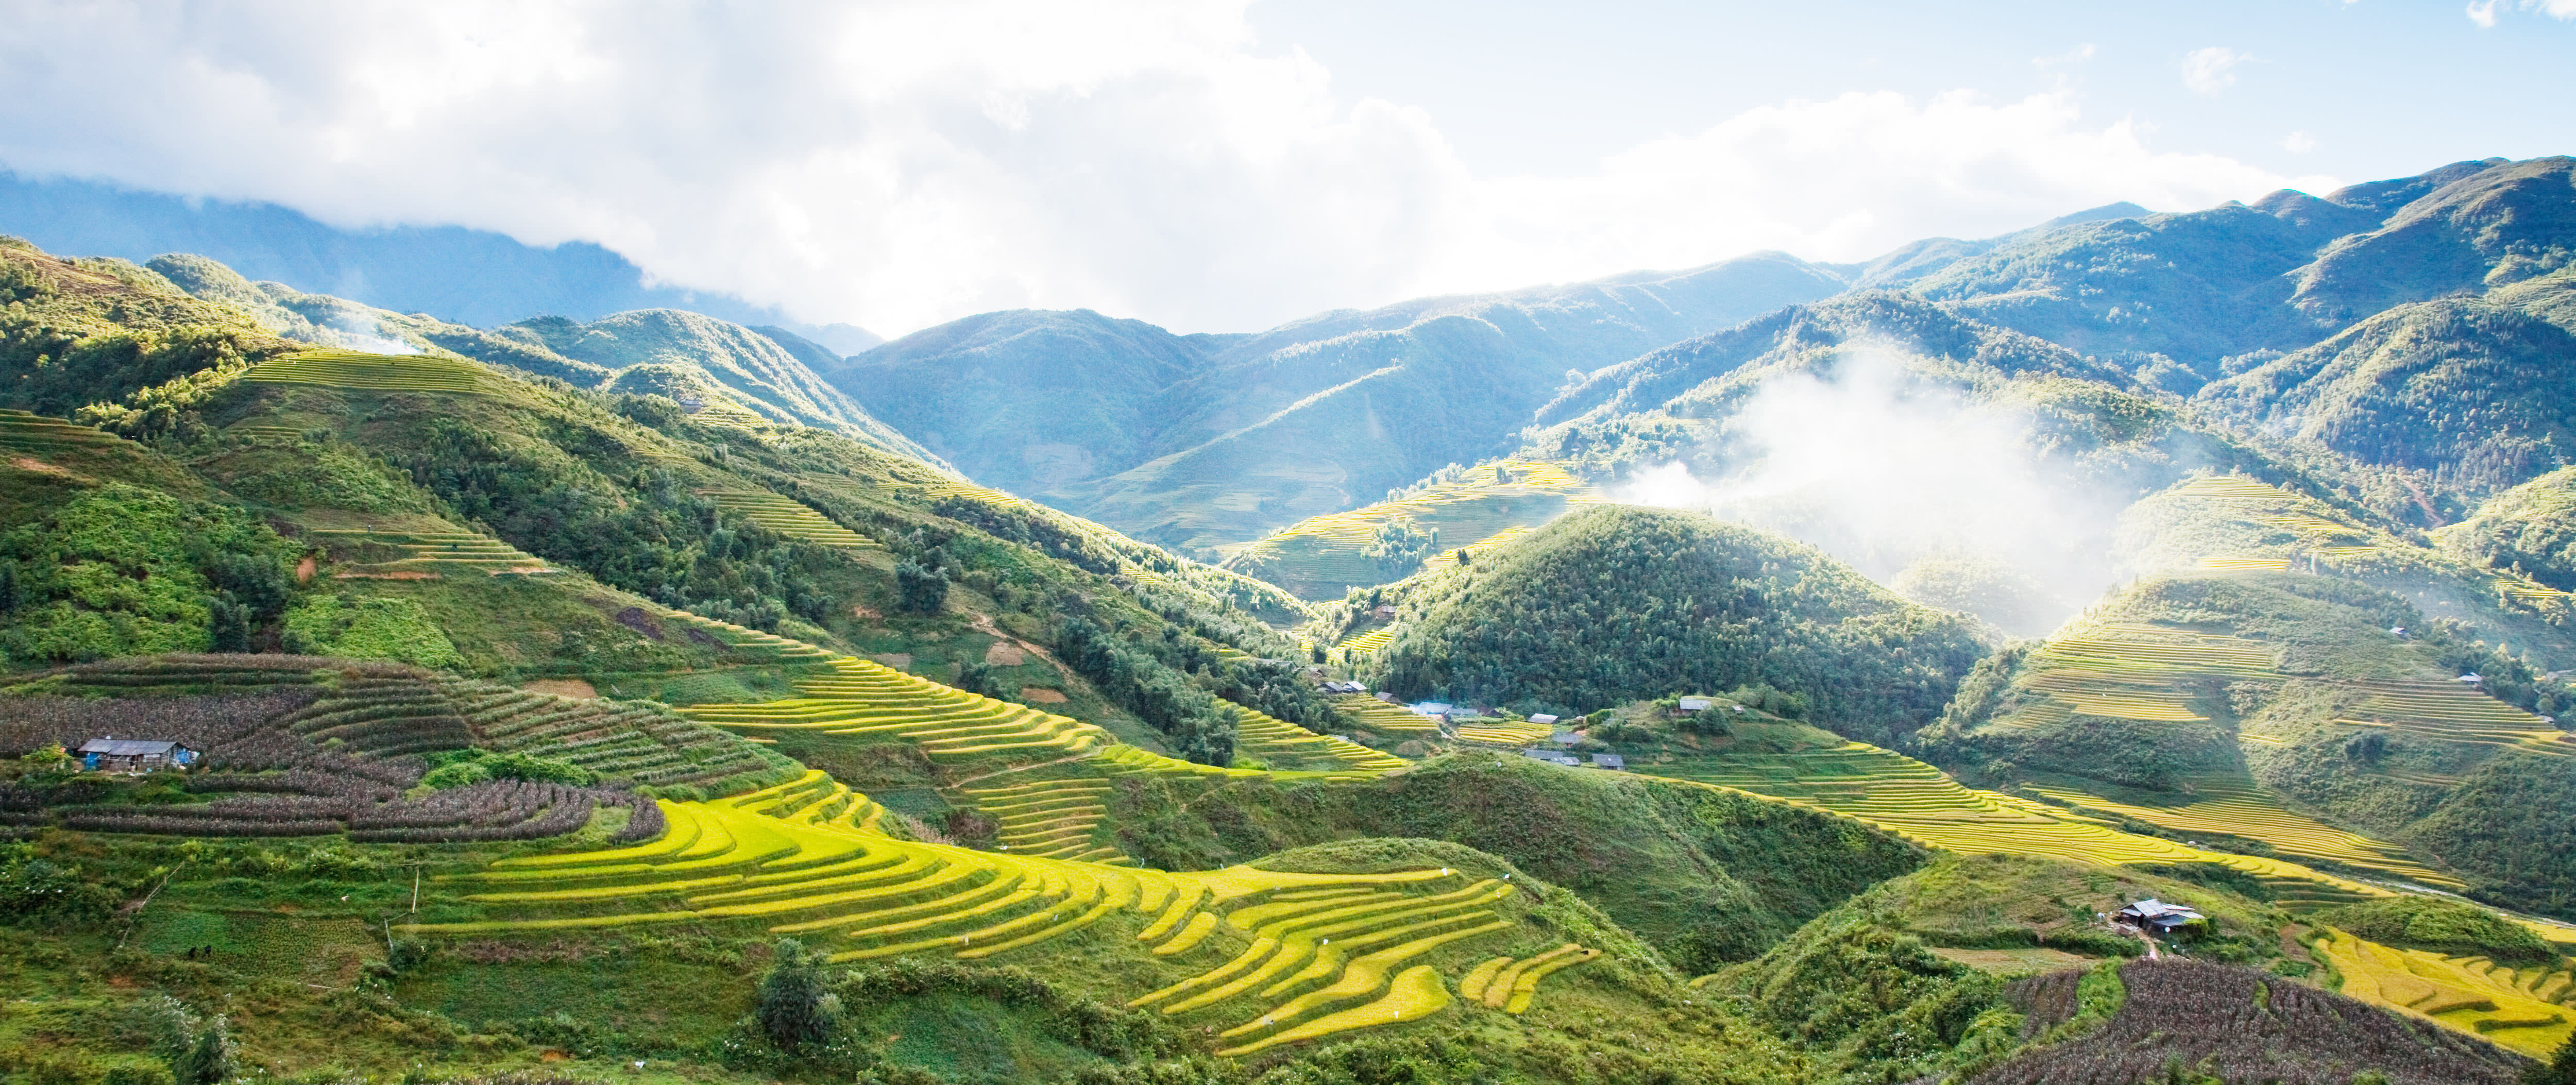 Embark on a majestic journey through the picturesque landscapes and rich cultural traditions of Sapa with unforgettable sapa tour.